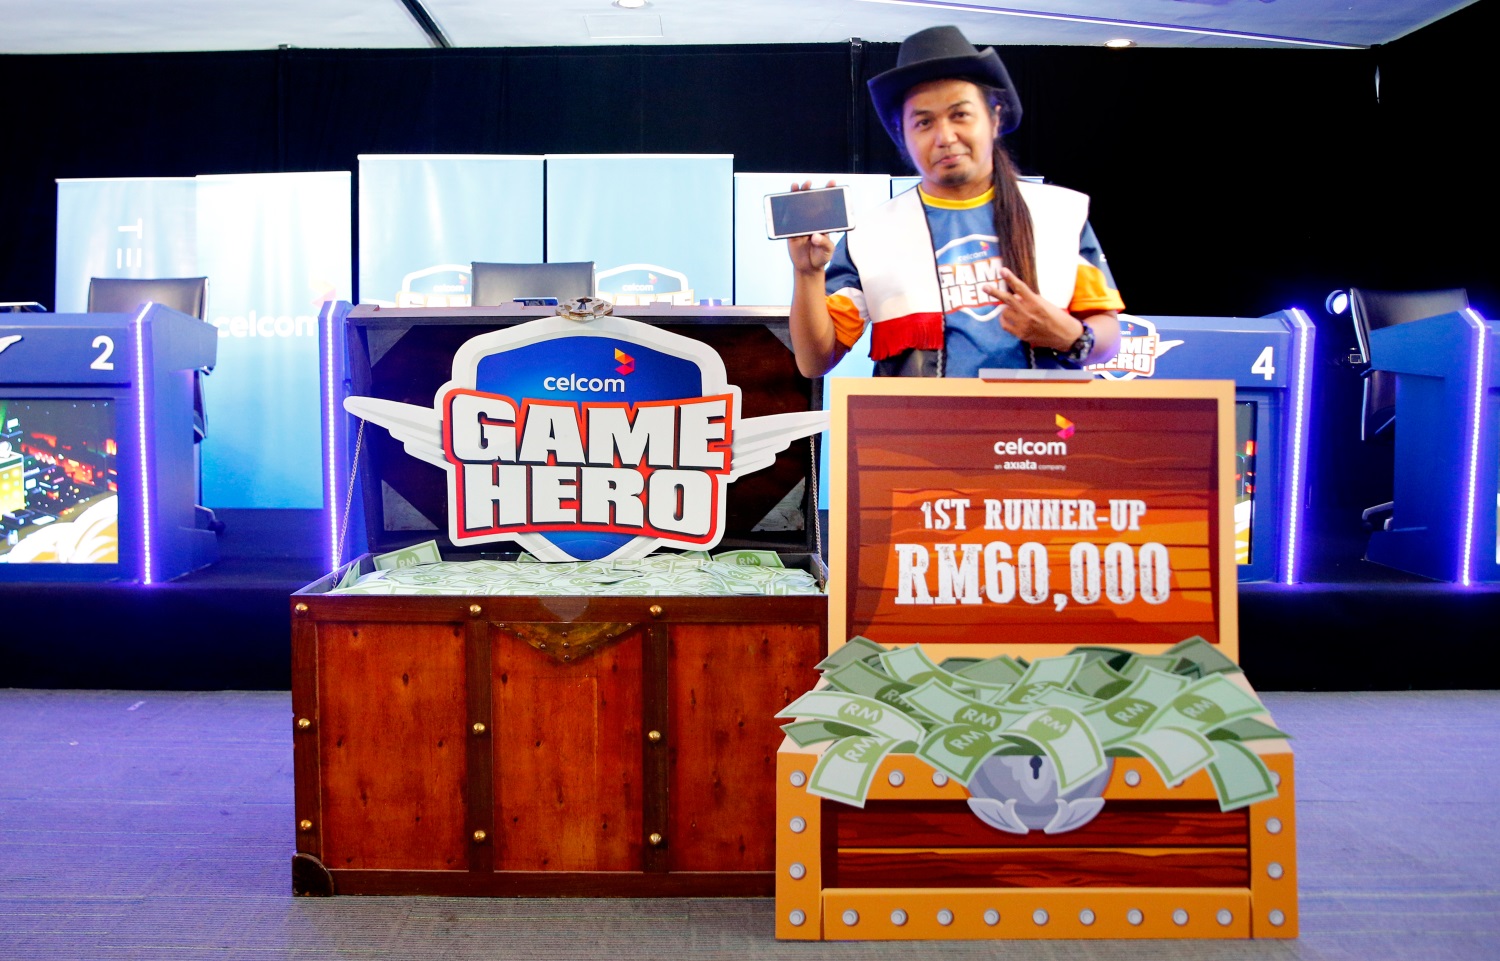 Mobile social gaming gains momentum with Celcom Game Hero Tournament Kill Shot Legacy